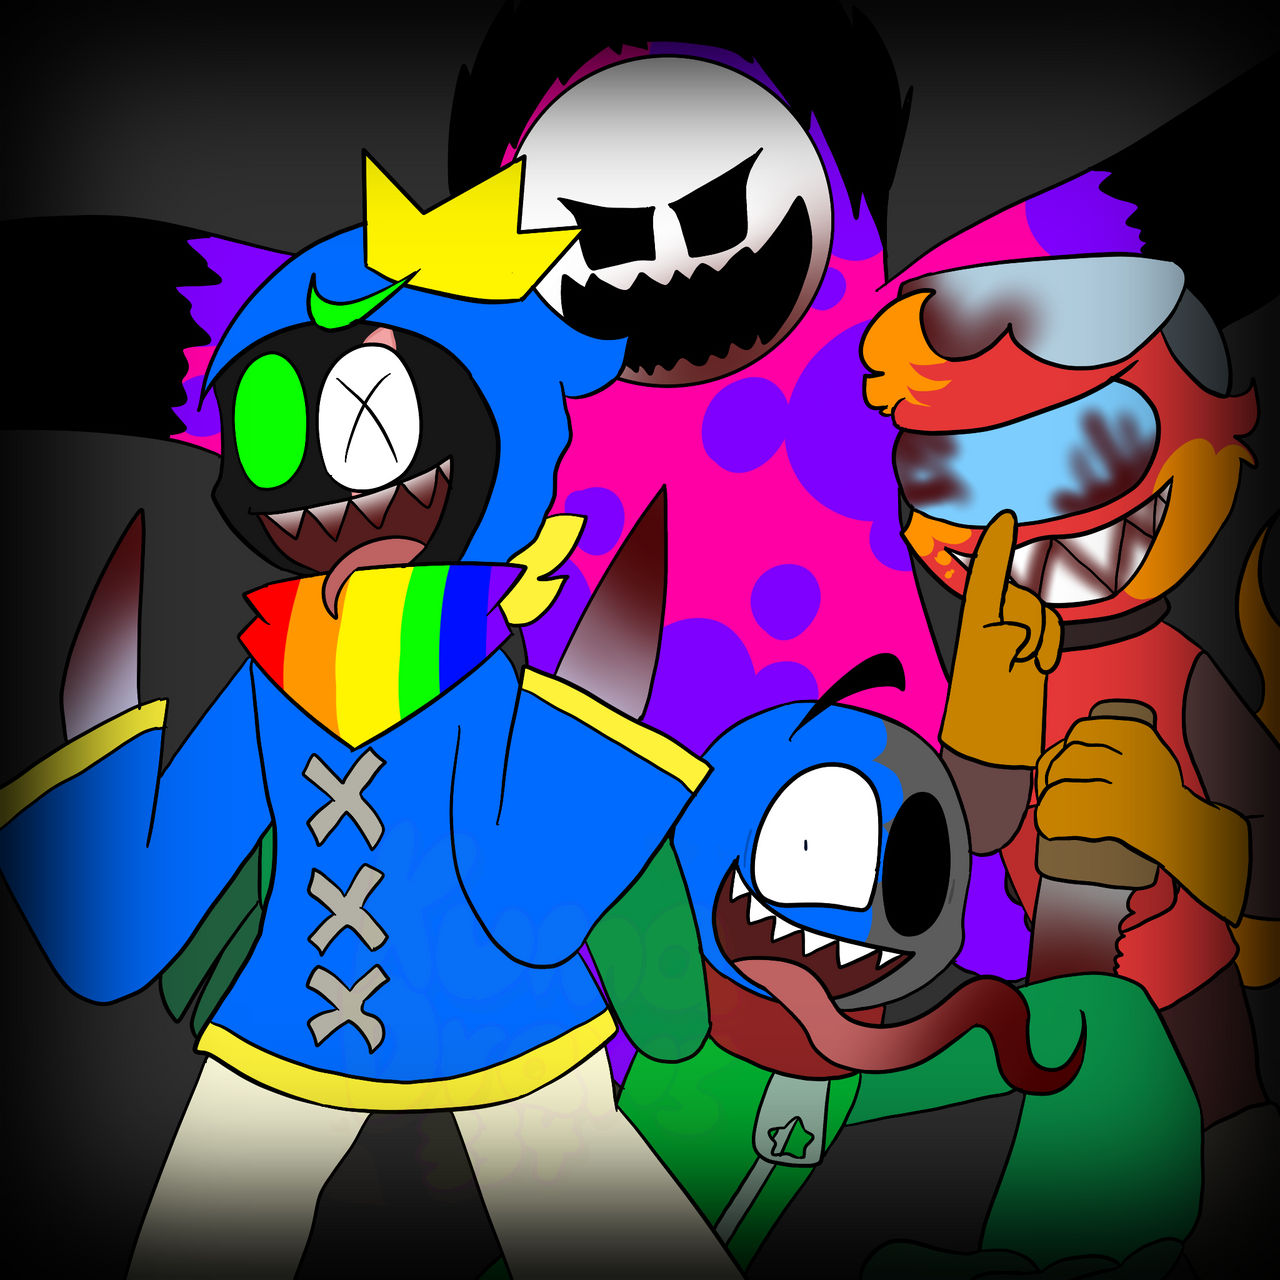 Drew some art of the recent roblox game rainbow friends! : r/roblox